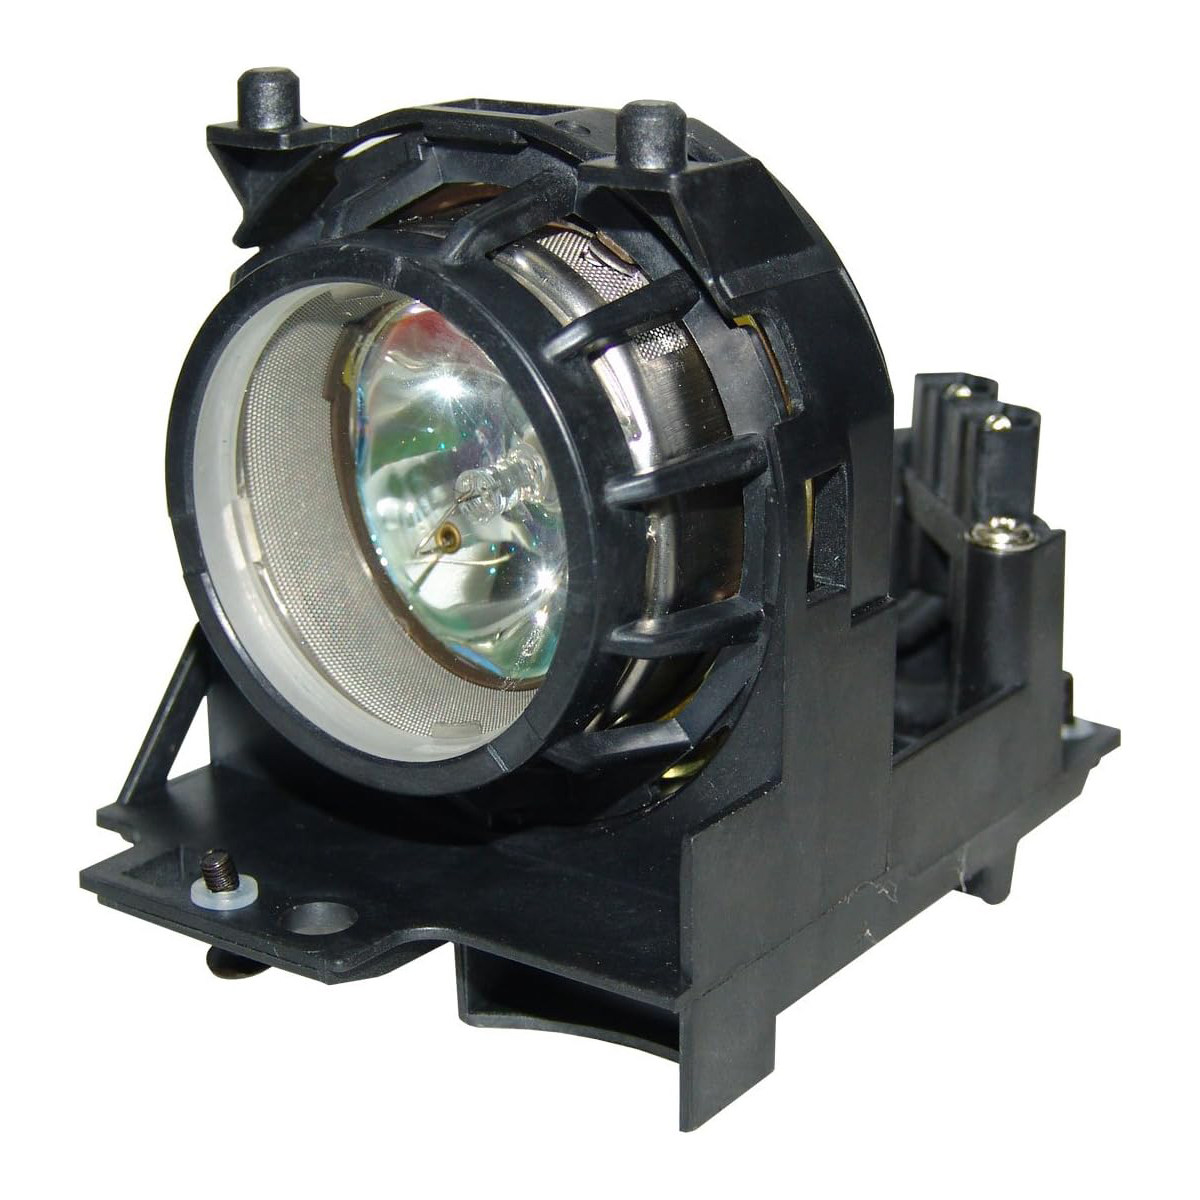 Replacement Projector lamp 78-6969-9743-2 For 3M S20